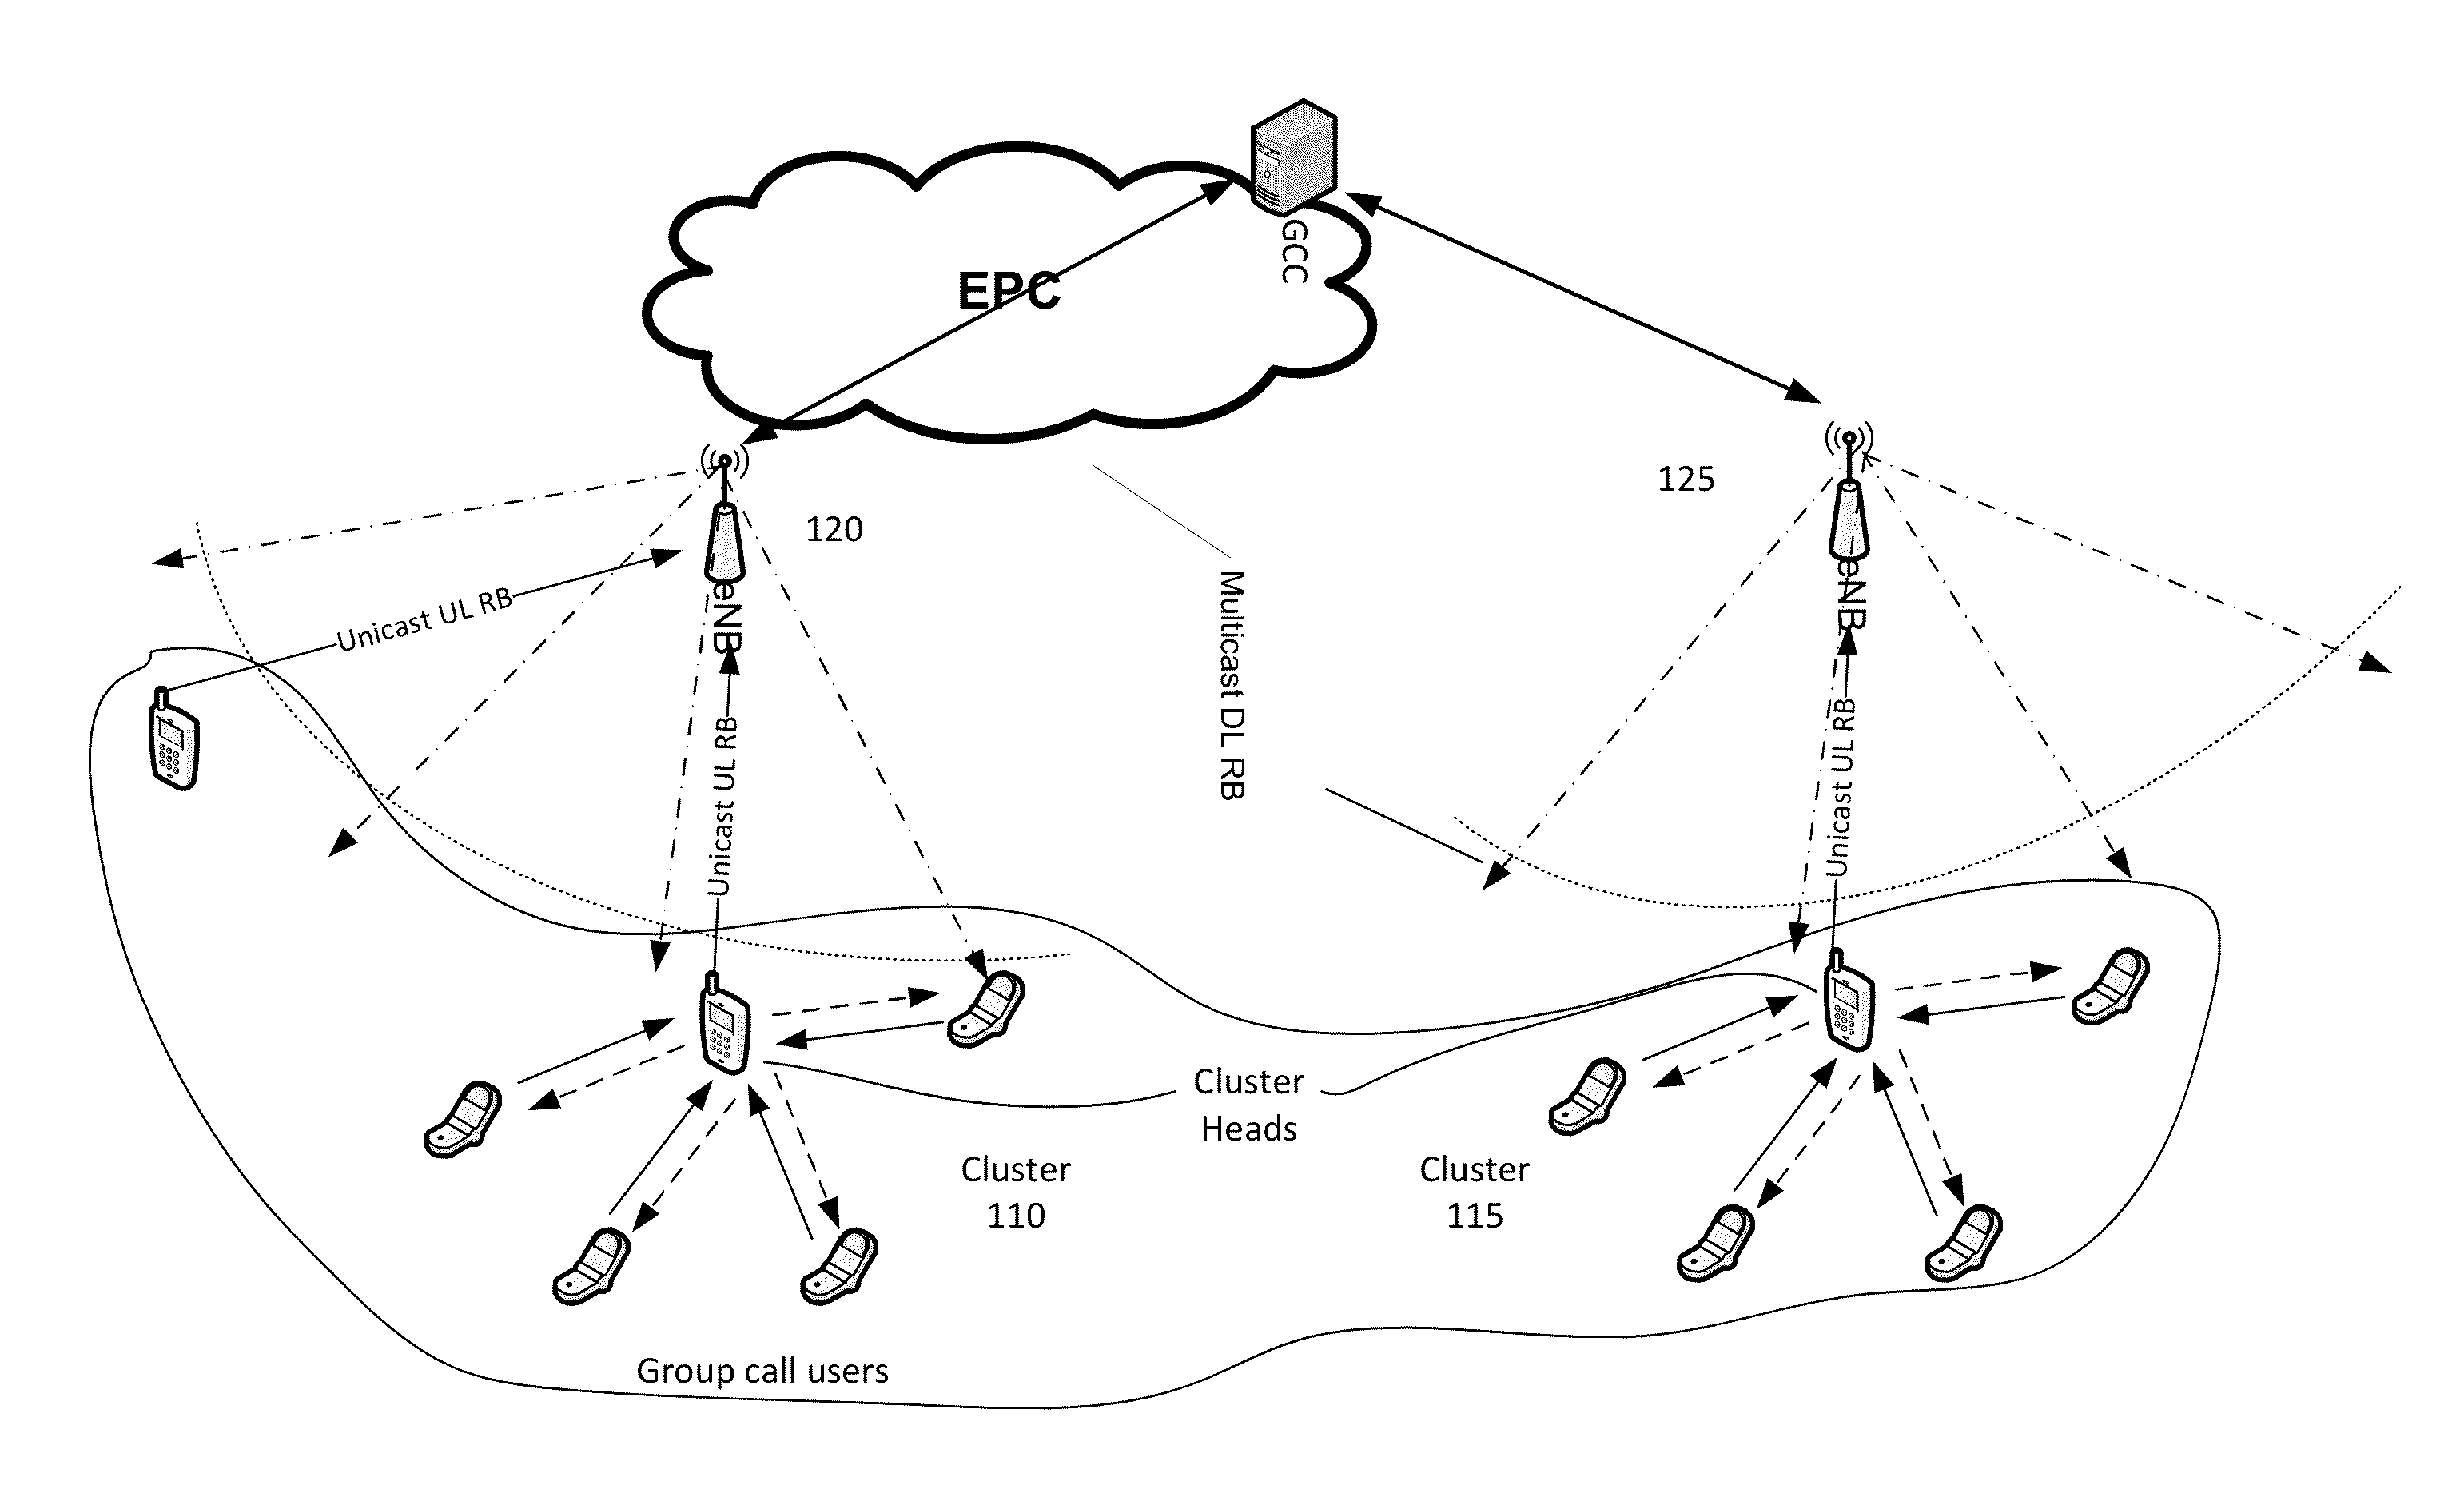 Device to device enhanced voice group call